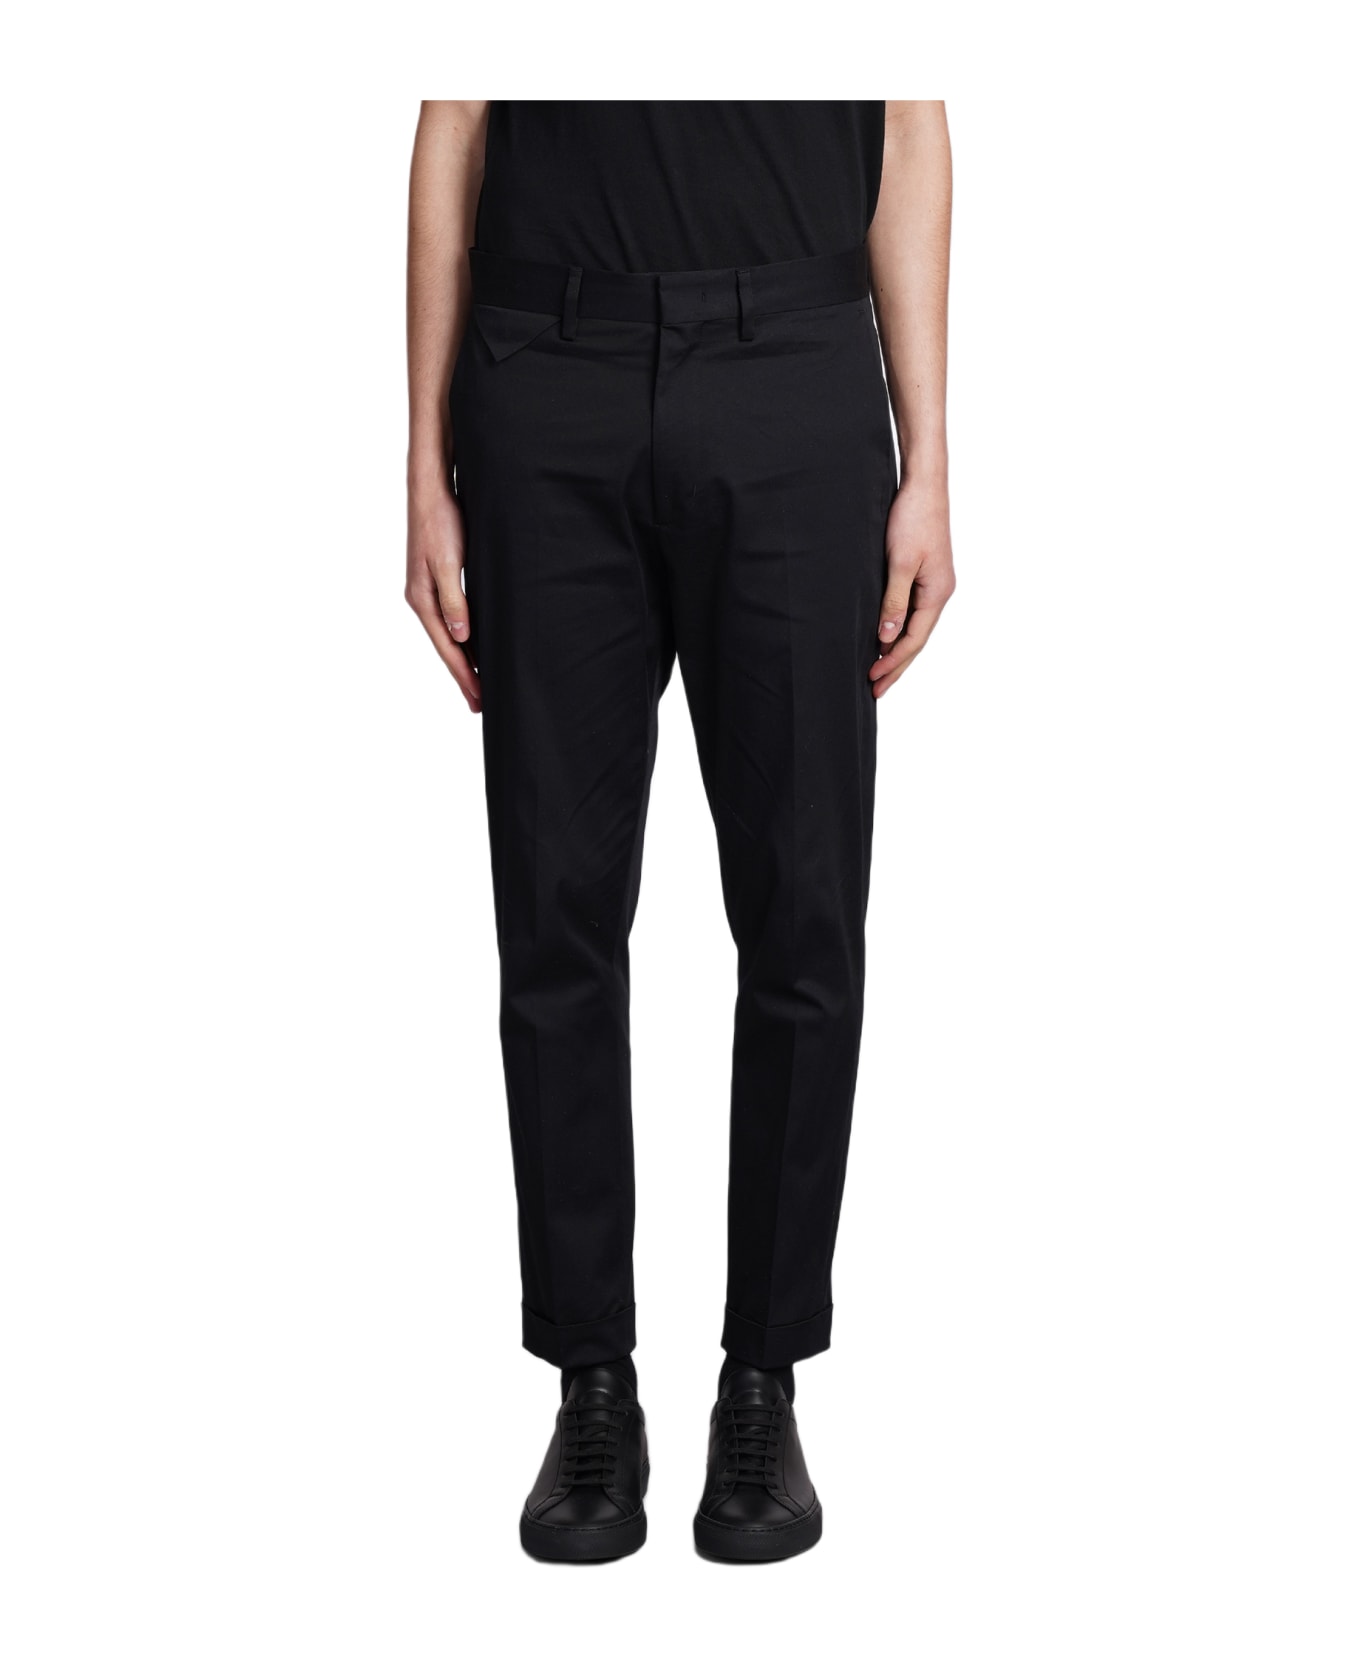 Low Brand Cooper T1.7 Pants In Black Cotton - black ボトムス